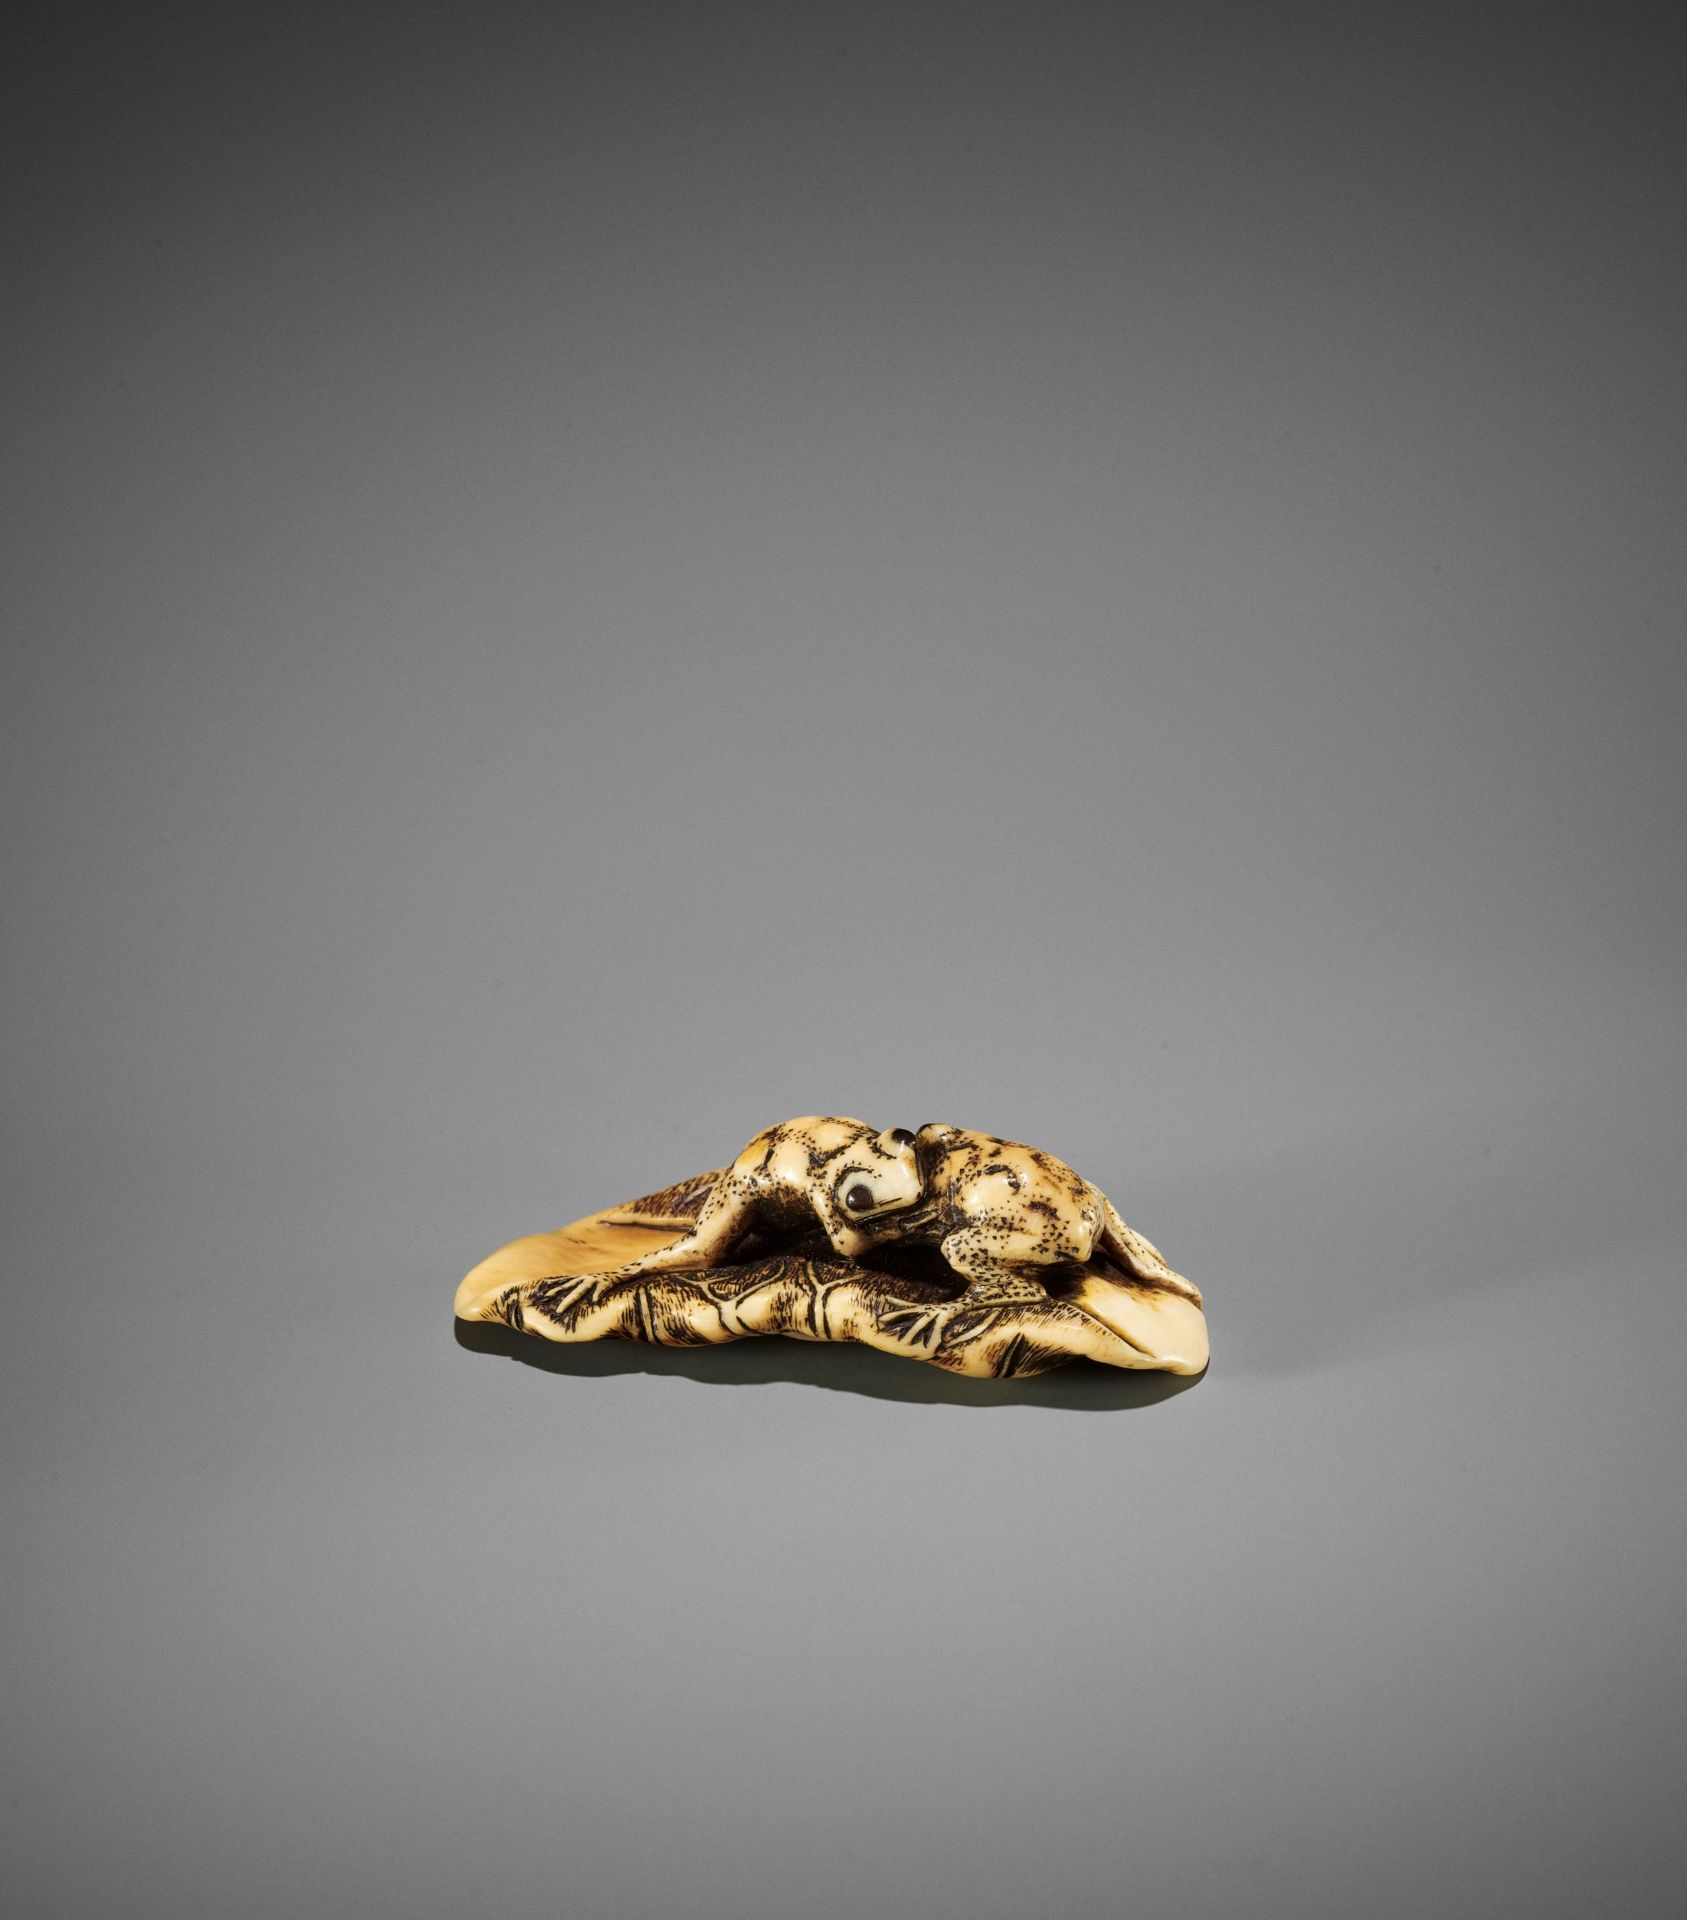 YOSHITOMO: AN IVORY NETSUKE OF TWO FROGS WRESTLING ON A LOTUS LEAF